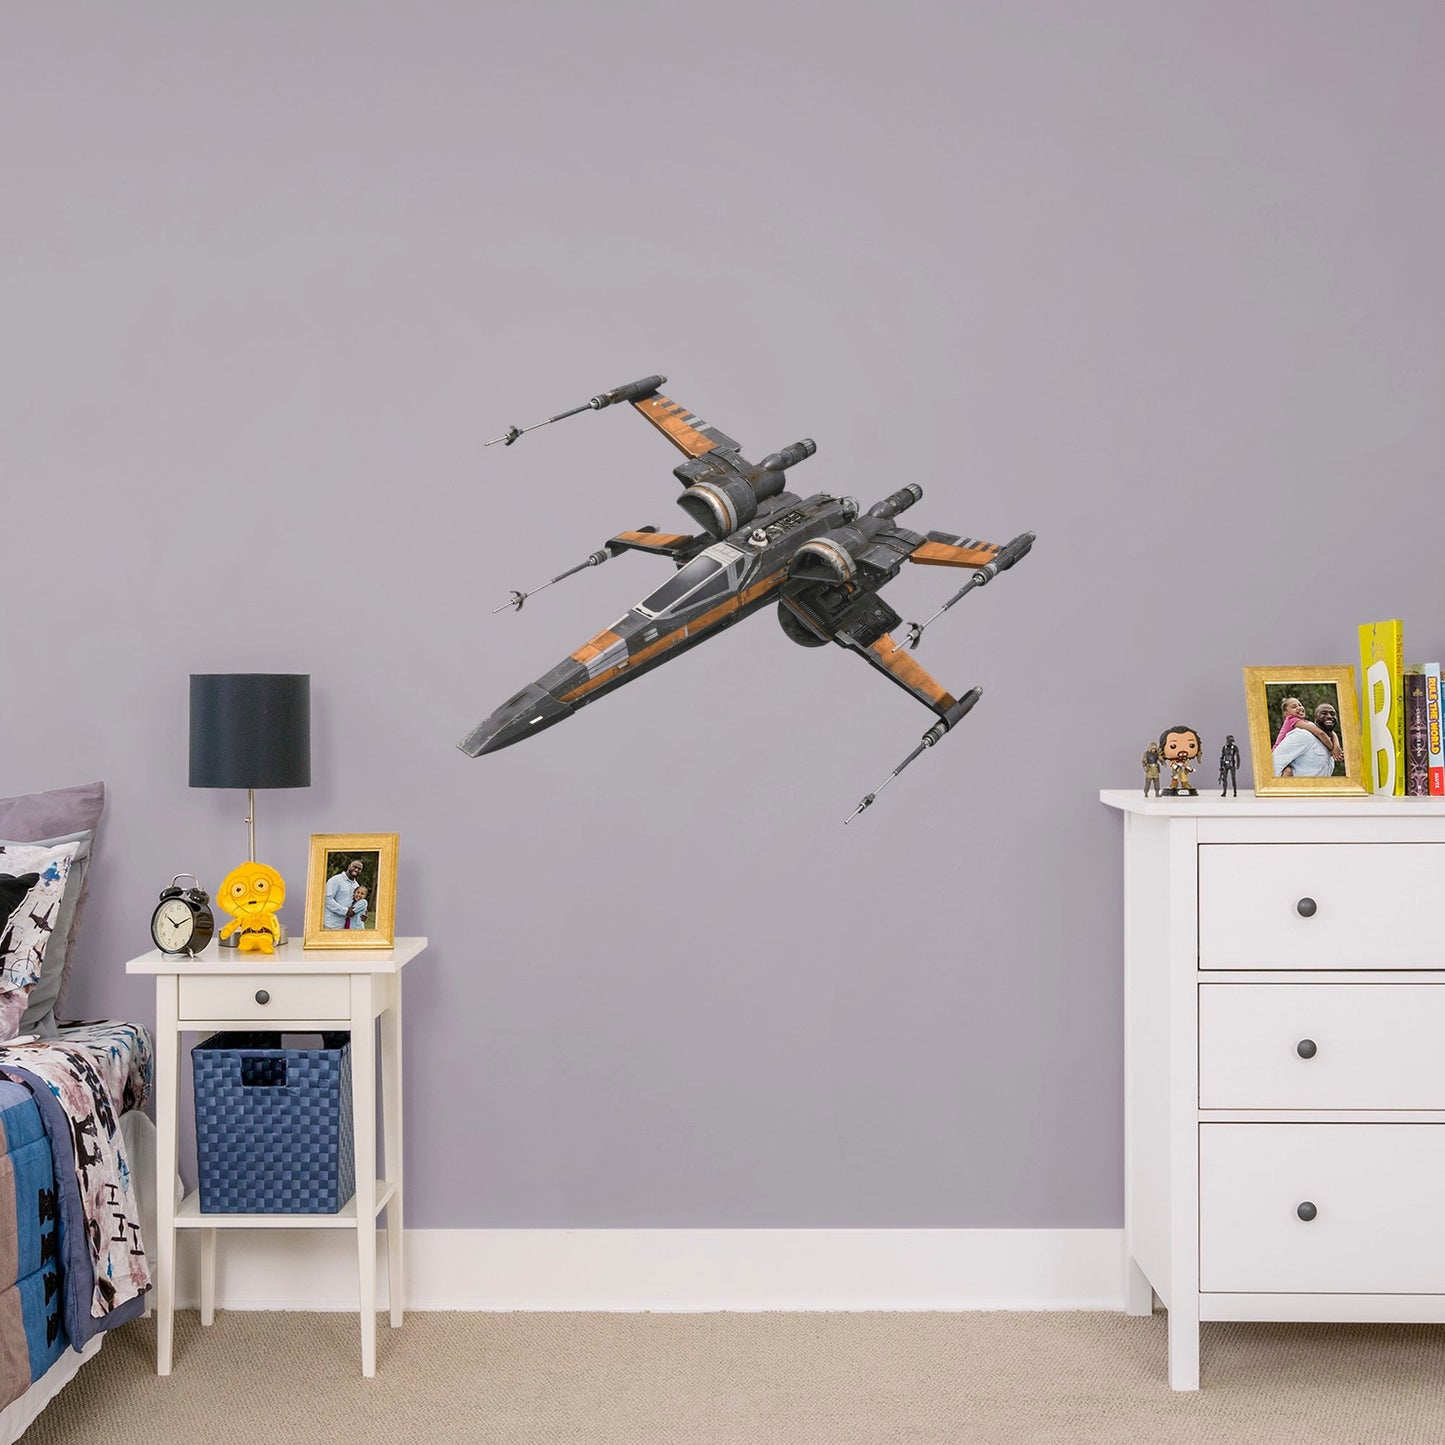 Star Wars: The Last Jedi Poe's X-Wing - Officially Licensed Removable Wall Decal